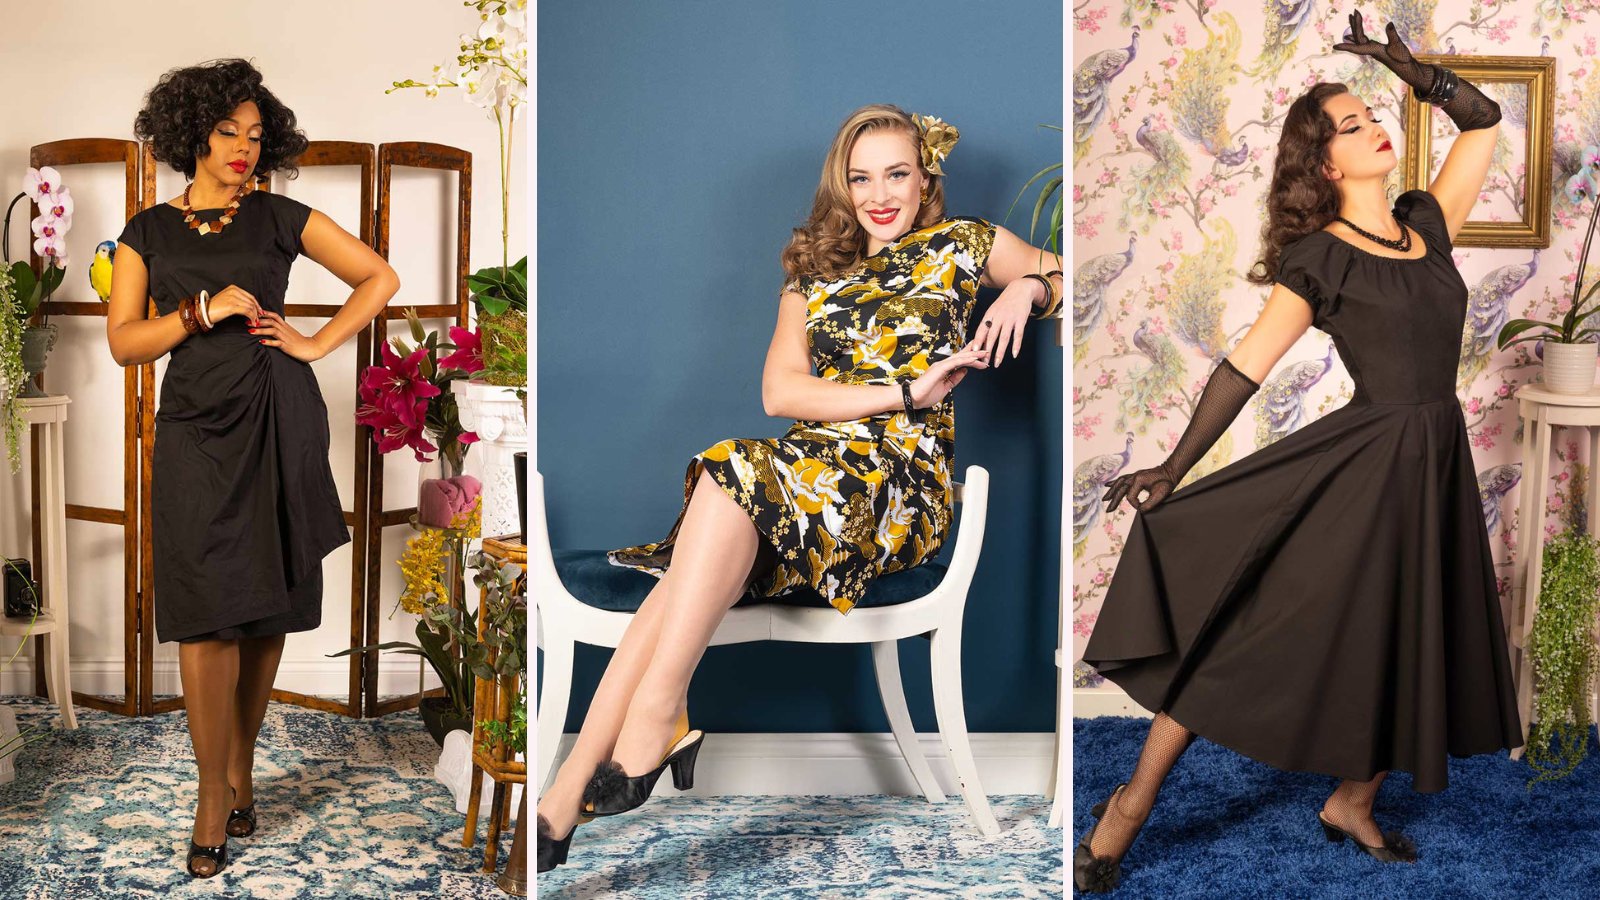 vintage and retro inspired fashion from the 1940s and 1950s